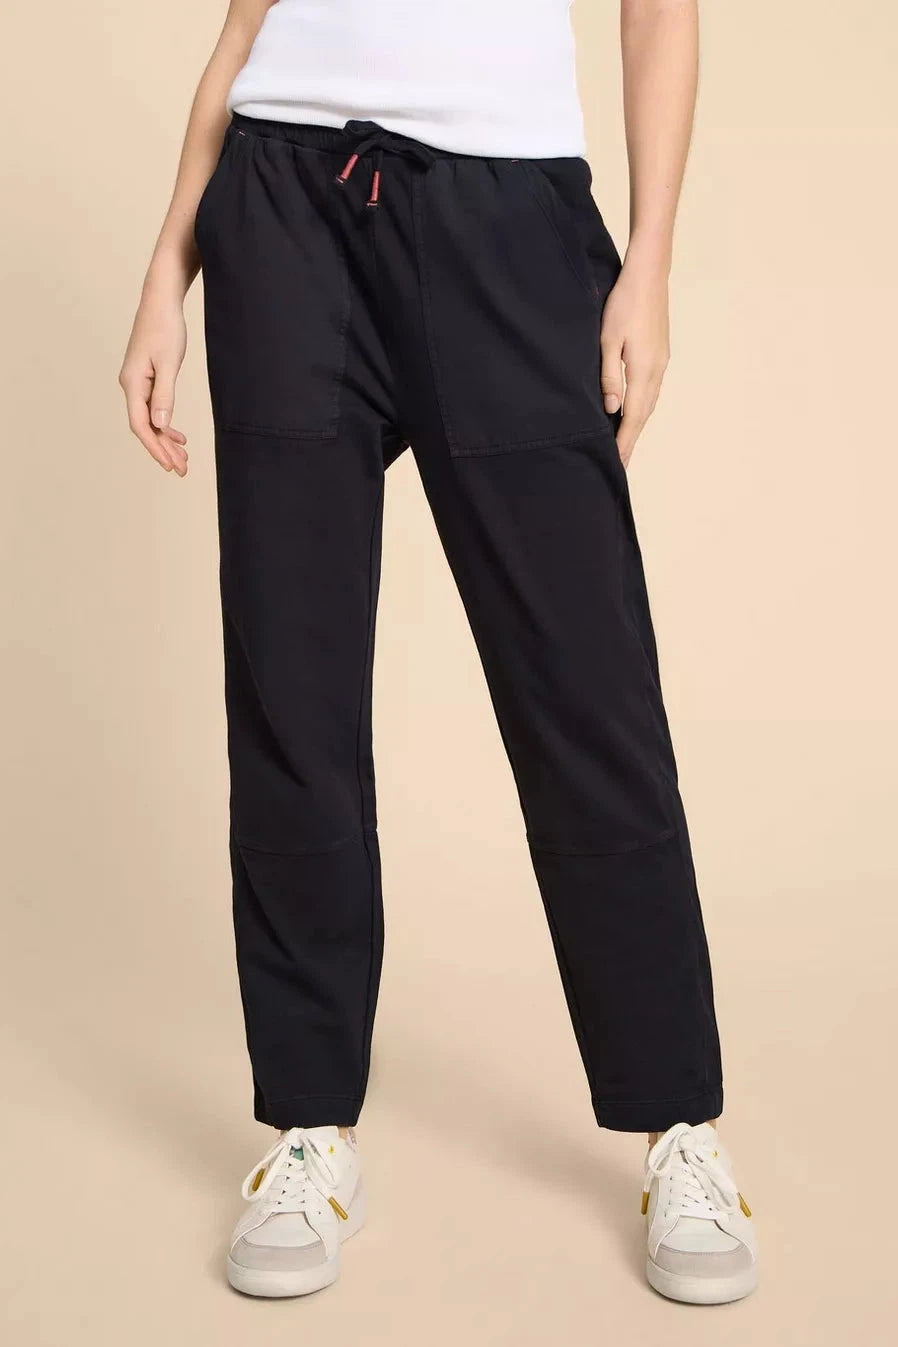 White Stuff Ava Jersey Jogger in Pure Black-Womens-Ohh! By Gum - Shop Sustainable